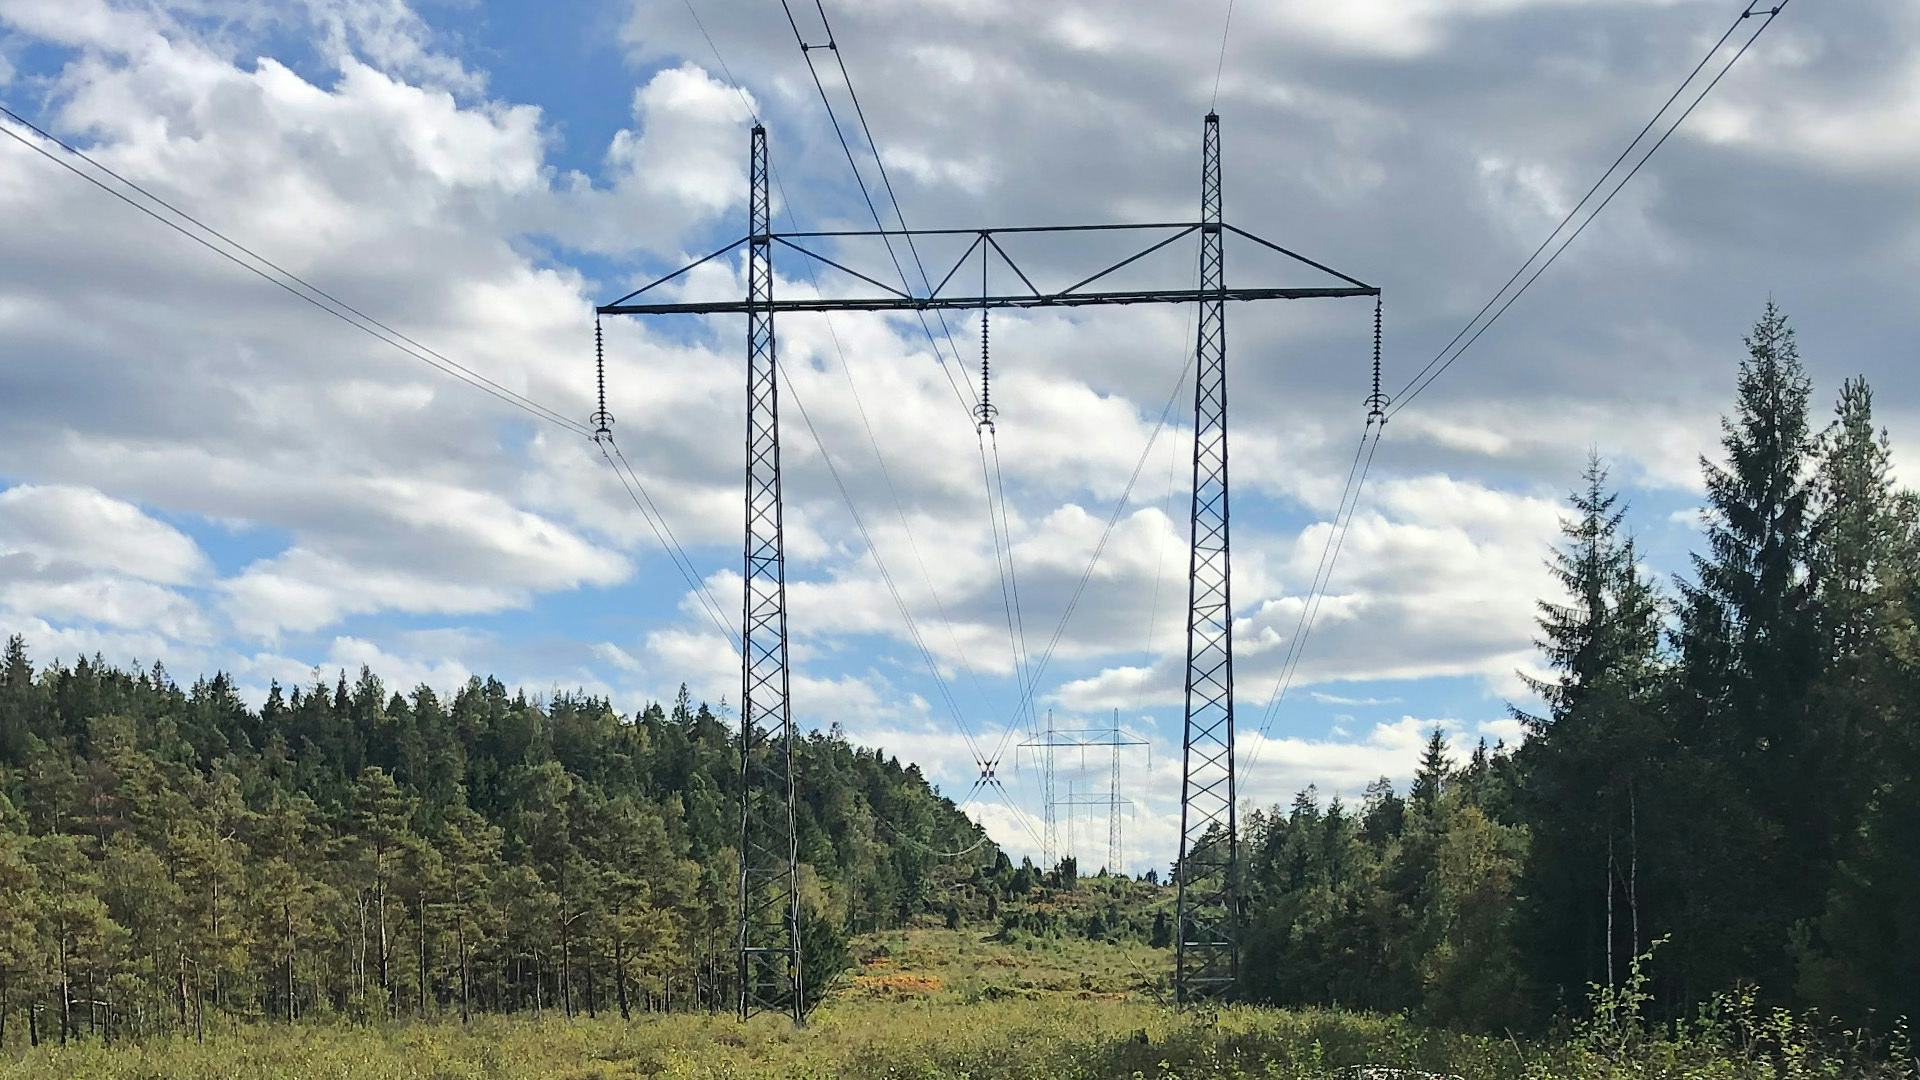 Transmission line surrounded by green trees